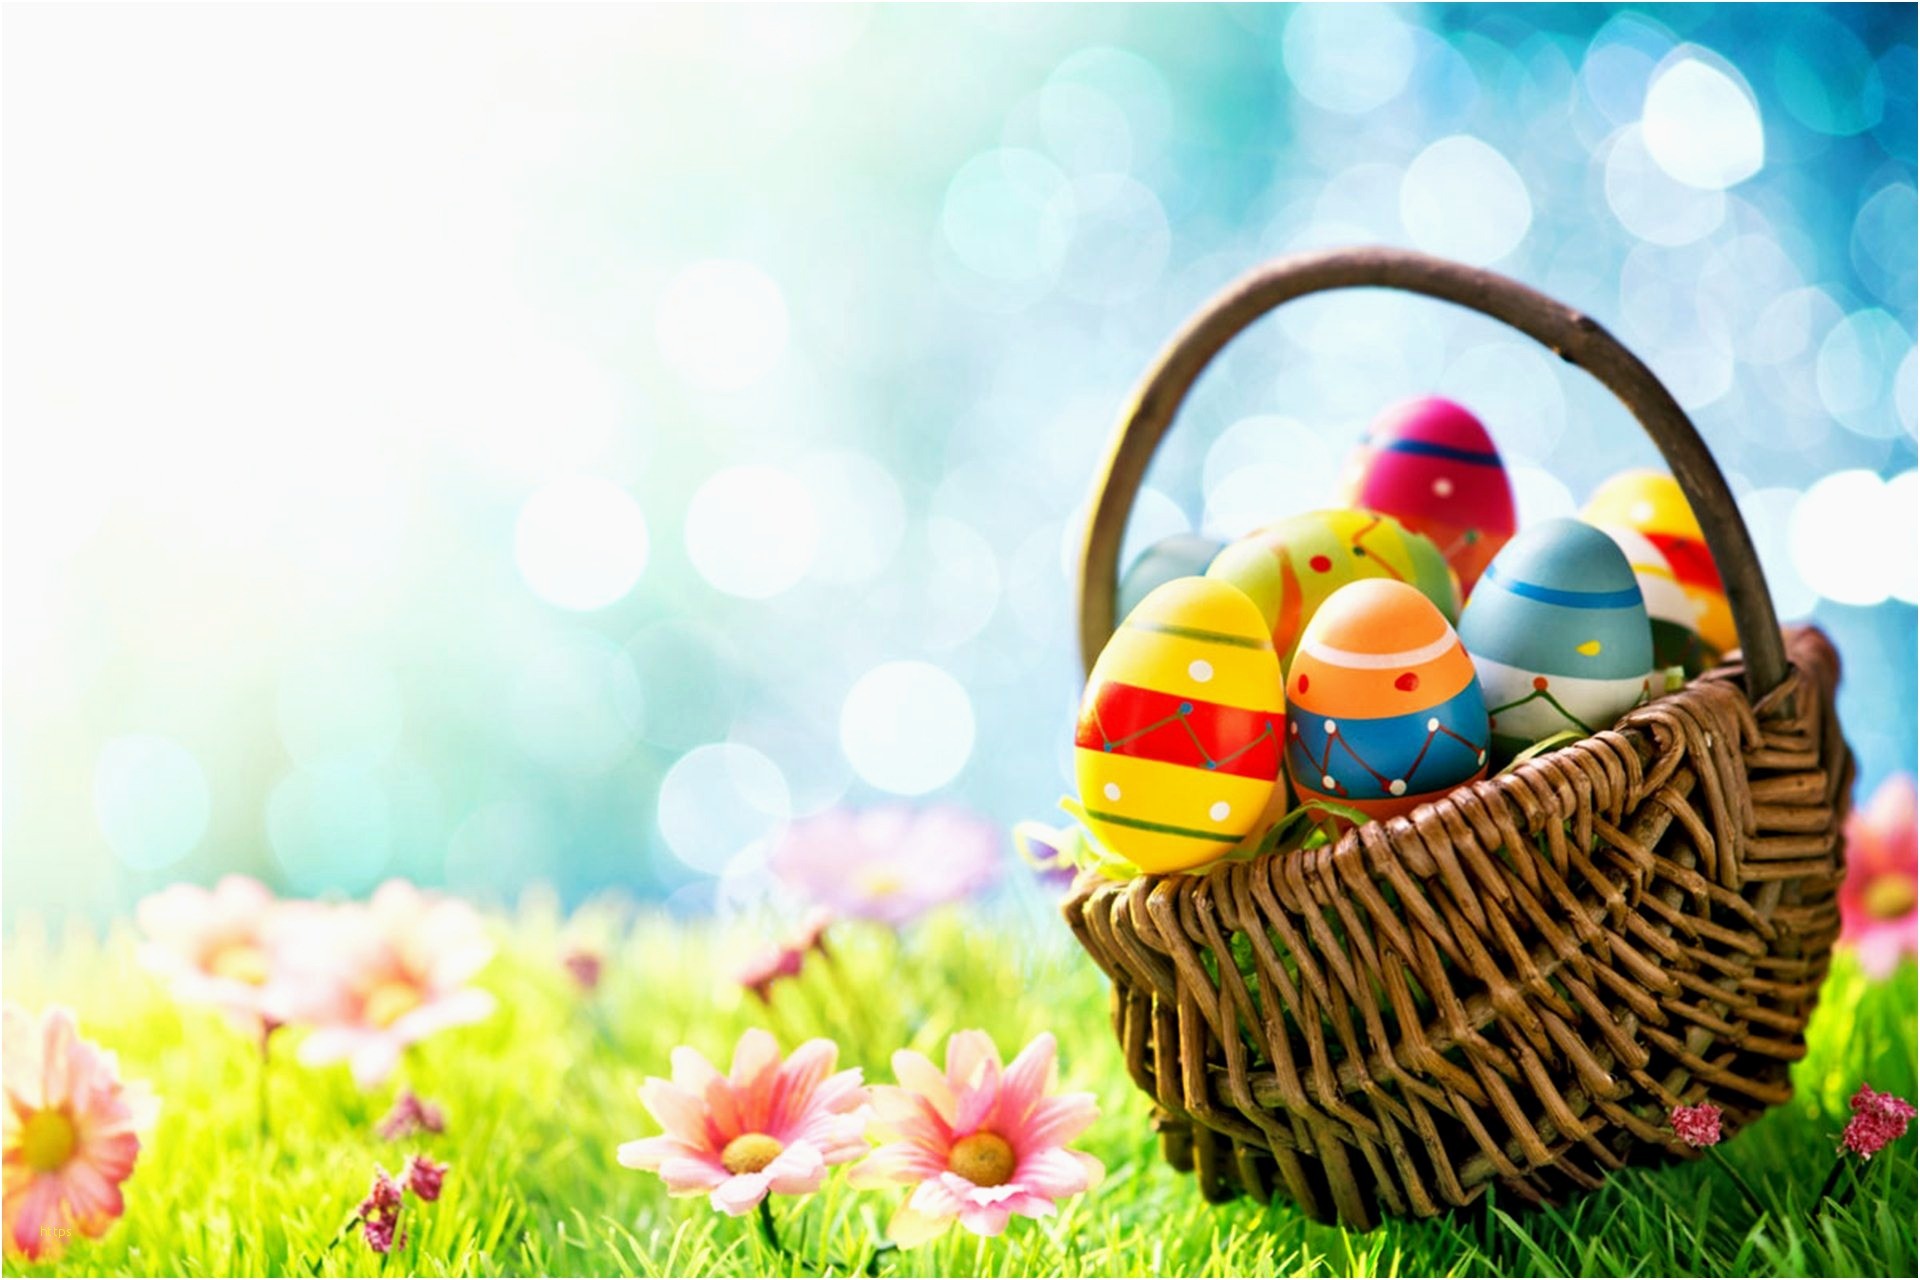 1920x1280 Easter Wallpaper Awesome Easter Wallpapers Archives Hdwallsource